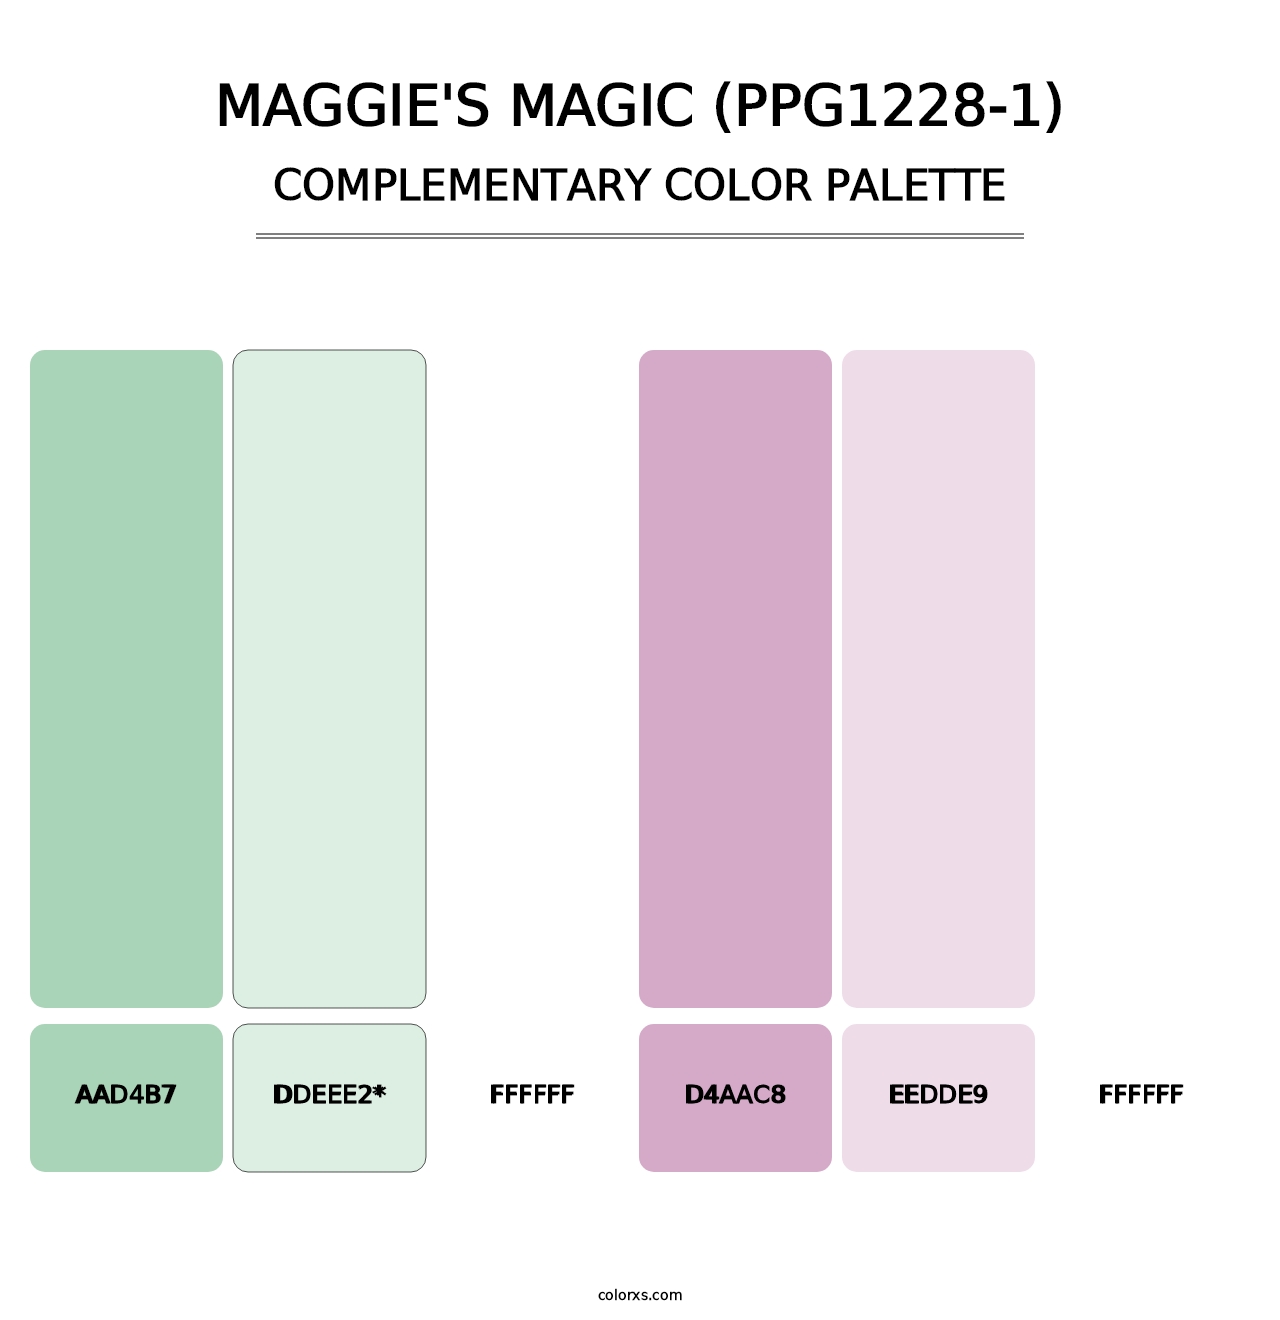 Maggie's Magic (PPG1228-1) - Complementary Color Palette